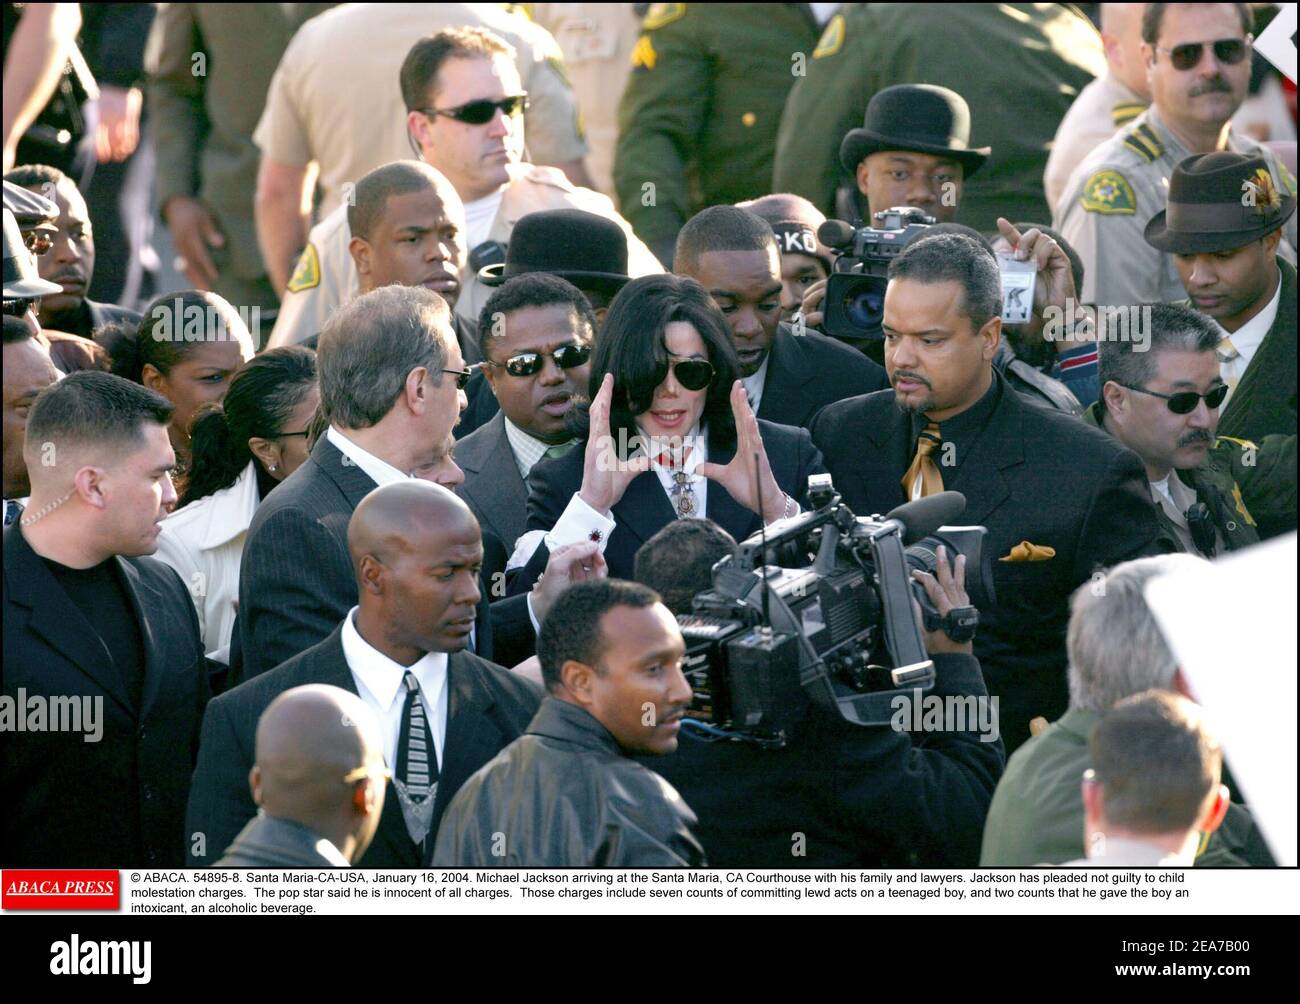 © ABACA. 54895-8. Santa Maria-CA-USA, January 16, 2004. Michael Jackson arriving at the Santa Maria, CA Courthouse with his family and lawyers. Jackson has pleaded not guilty to child molestation charges. The pop star said he is innocent of all charges. Those charges include seven counts of committing lewd acts on a teenaged boy, and two counts that he gave the boy an intoxicant, an alcoholic beverage. Stock Photo